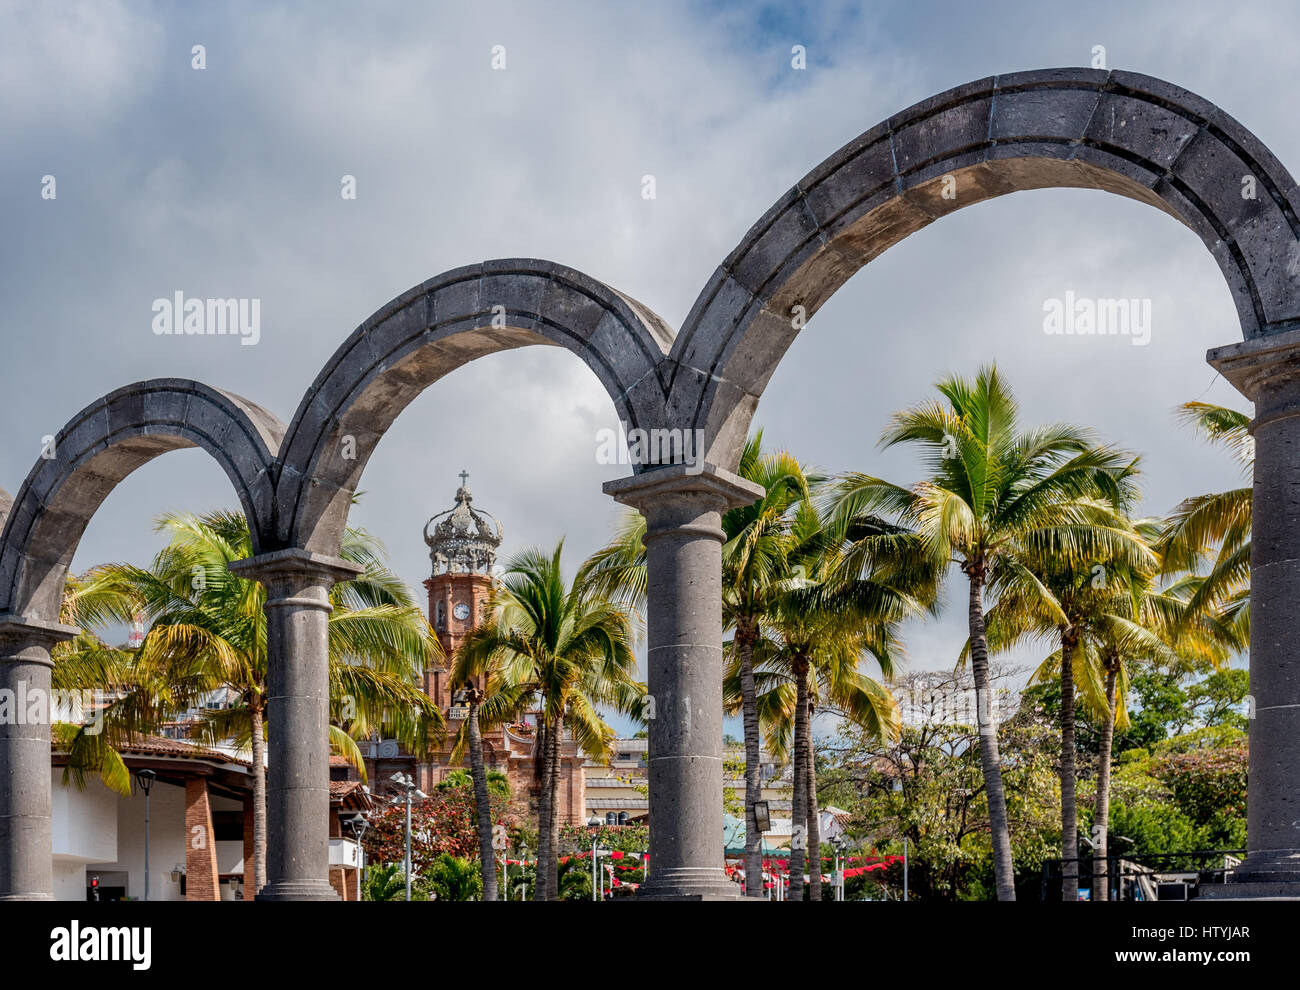 View of Puerto Vallarta through the arches or los arcos on the Malecon showing Old Town or Old Vallarta and Our Lady of Guadalupe Church tower. Stock Photo